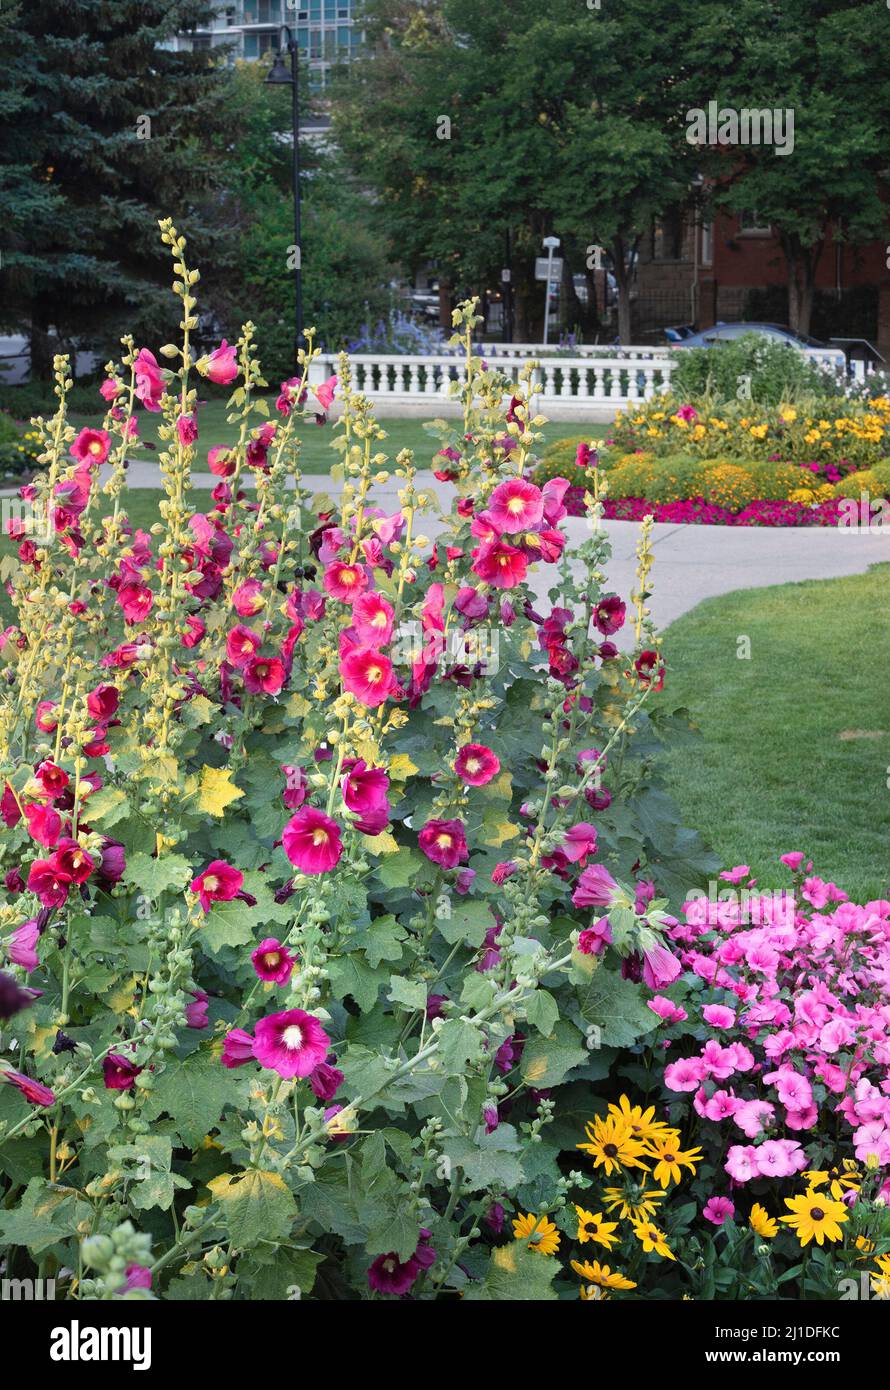 Beaulieu Gardens at the historic Lougheed House in downtown Calgary, Alberta, Canada with Pink Hollyhocks and Lavatera Ruby Regis flowers in bloom Stock Photo